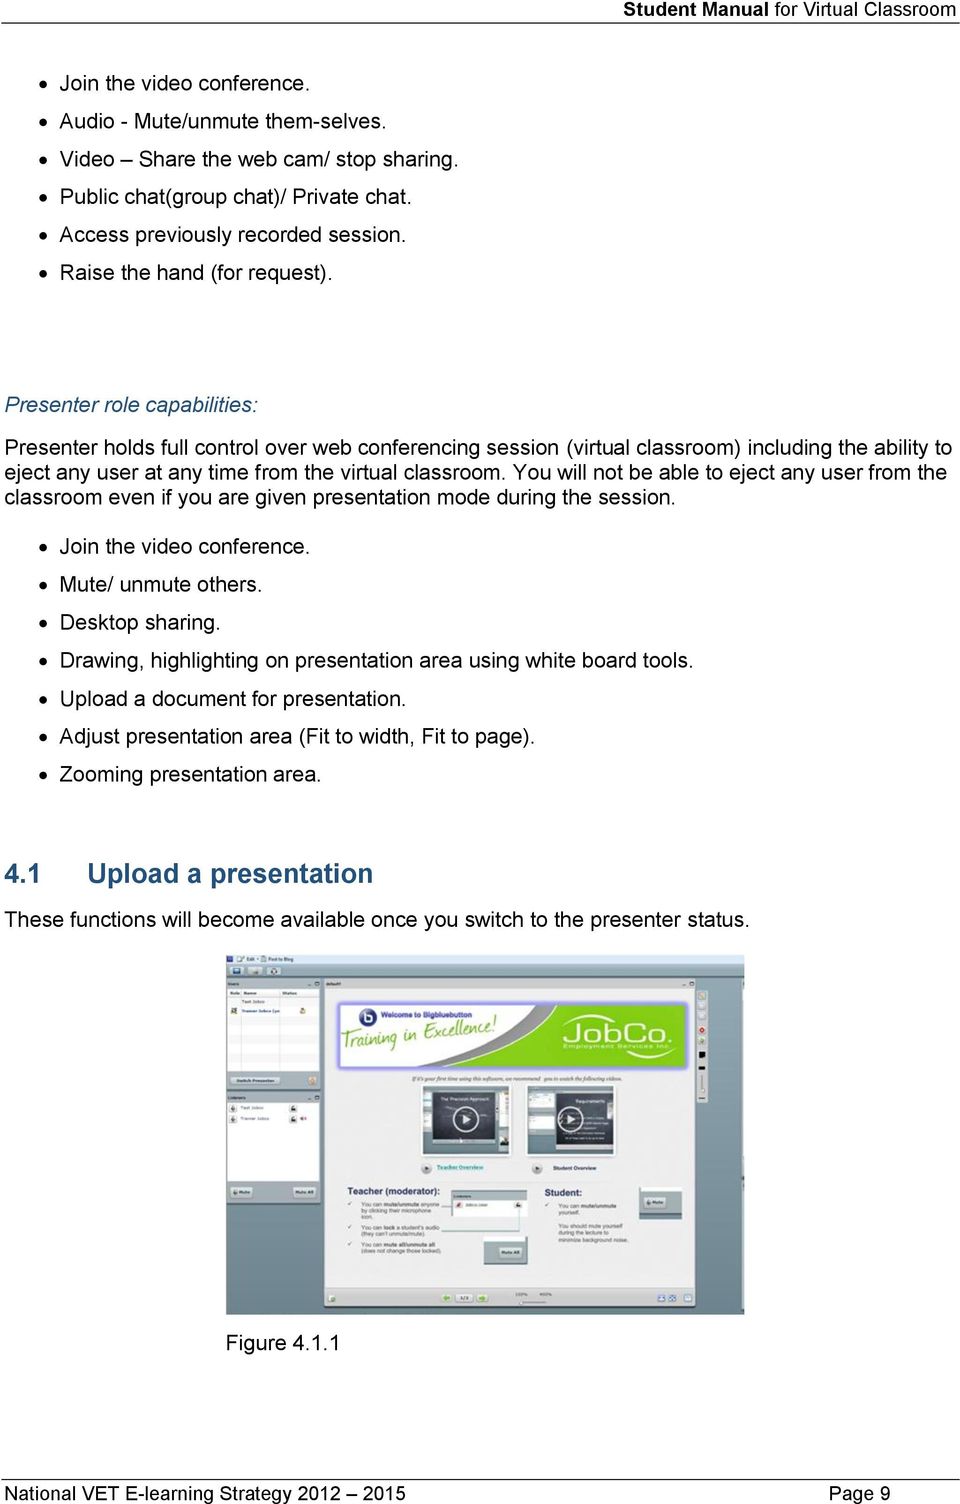 Presenter role capabilities: Presenter holds full control over web conferencing session (virtual classroom) including the ability to eject any user at any time from the virtual classroom.